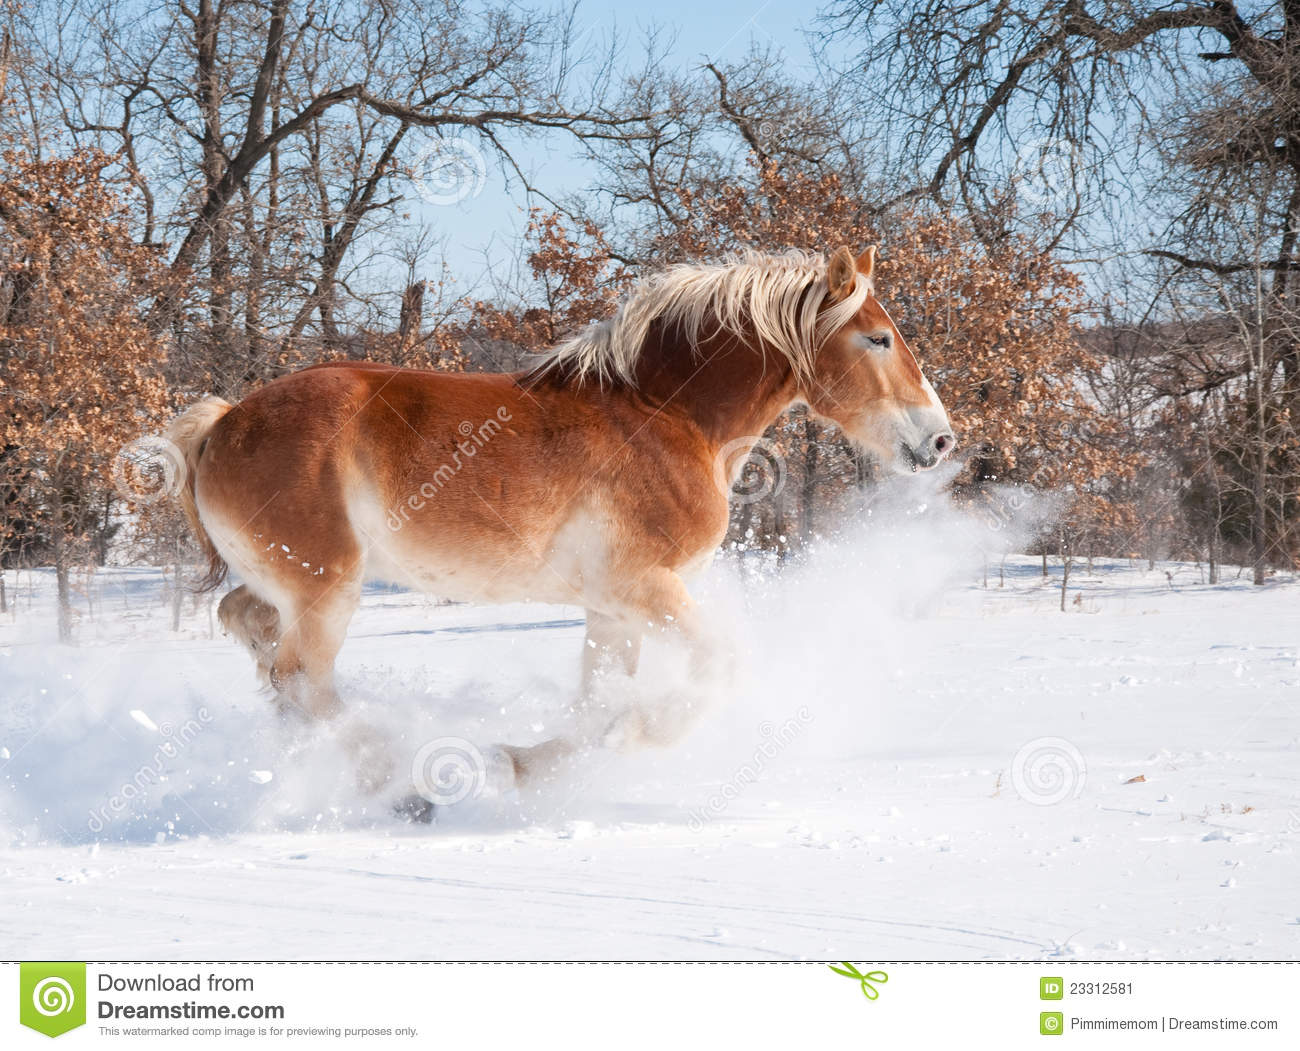 Magnificent Belgian Draft Horse Charging Through Deep Snow On A Bright    